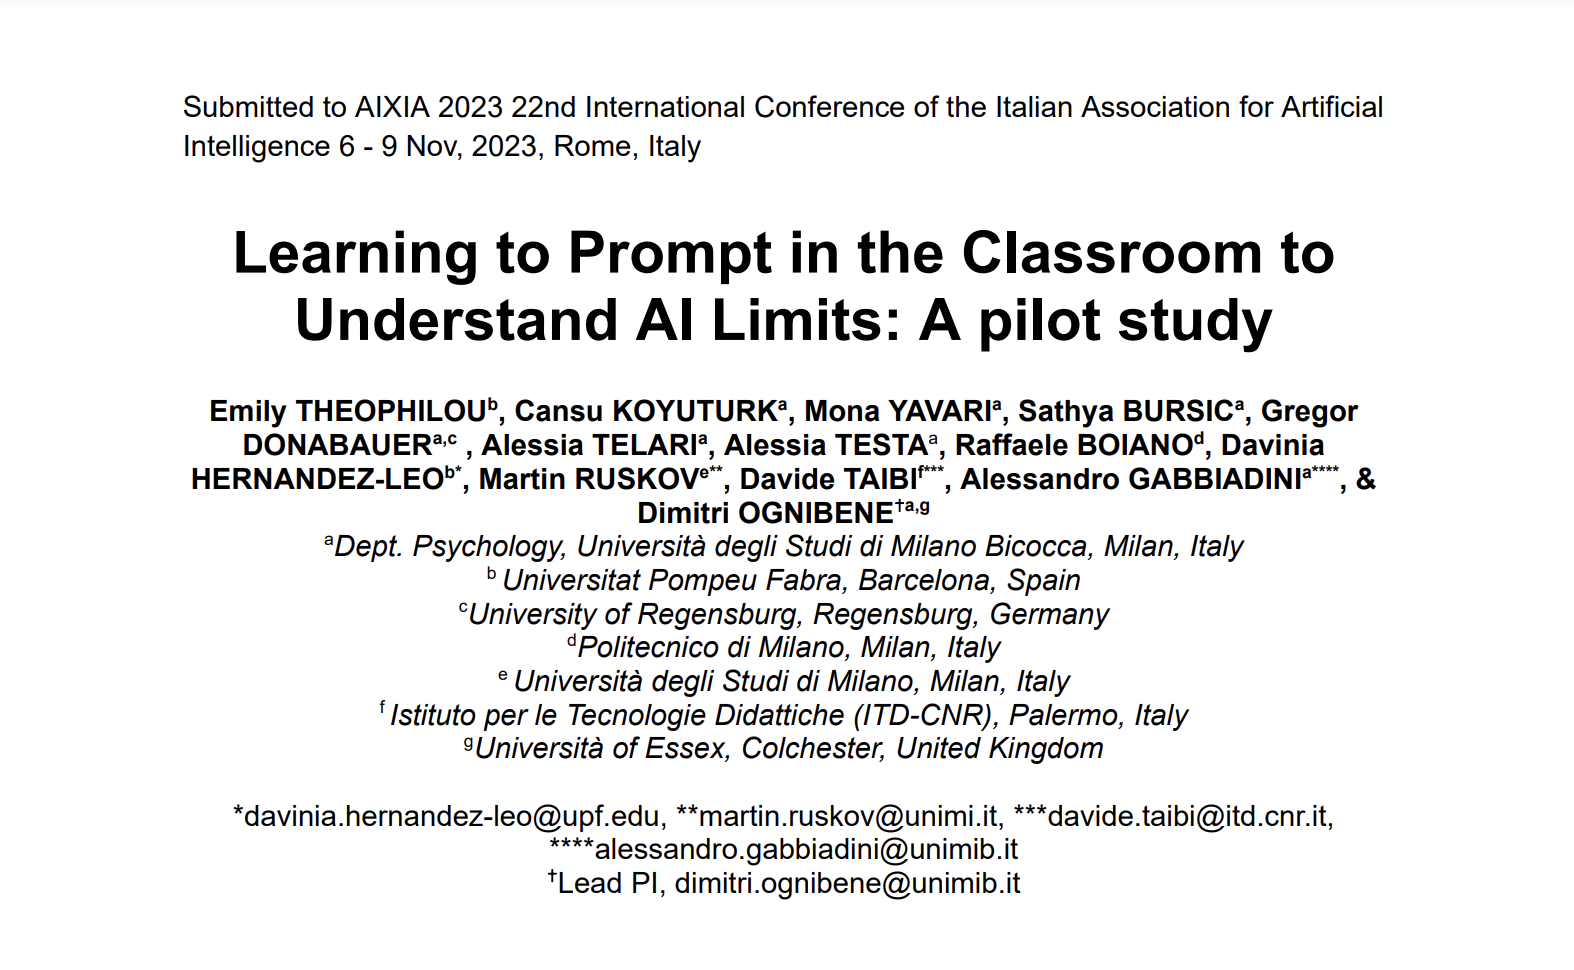 Learning to Prompt in the Classroom to Understand AI Limits: A pilot study, AIxIA 2023